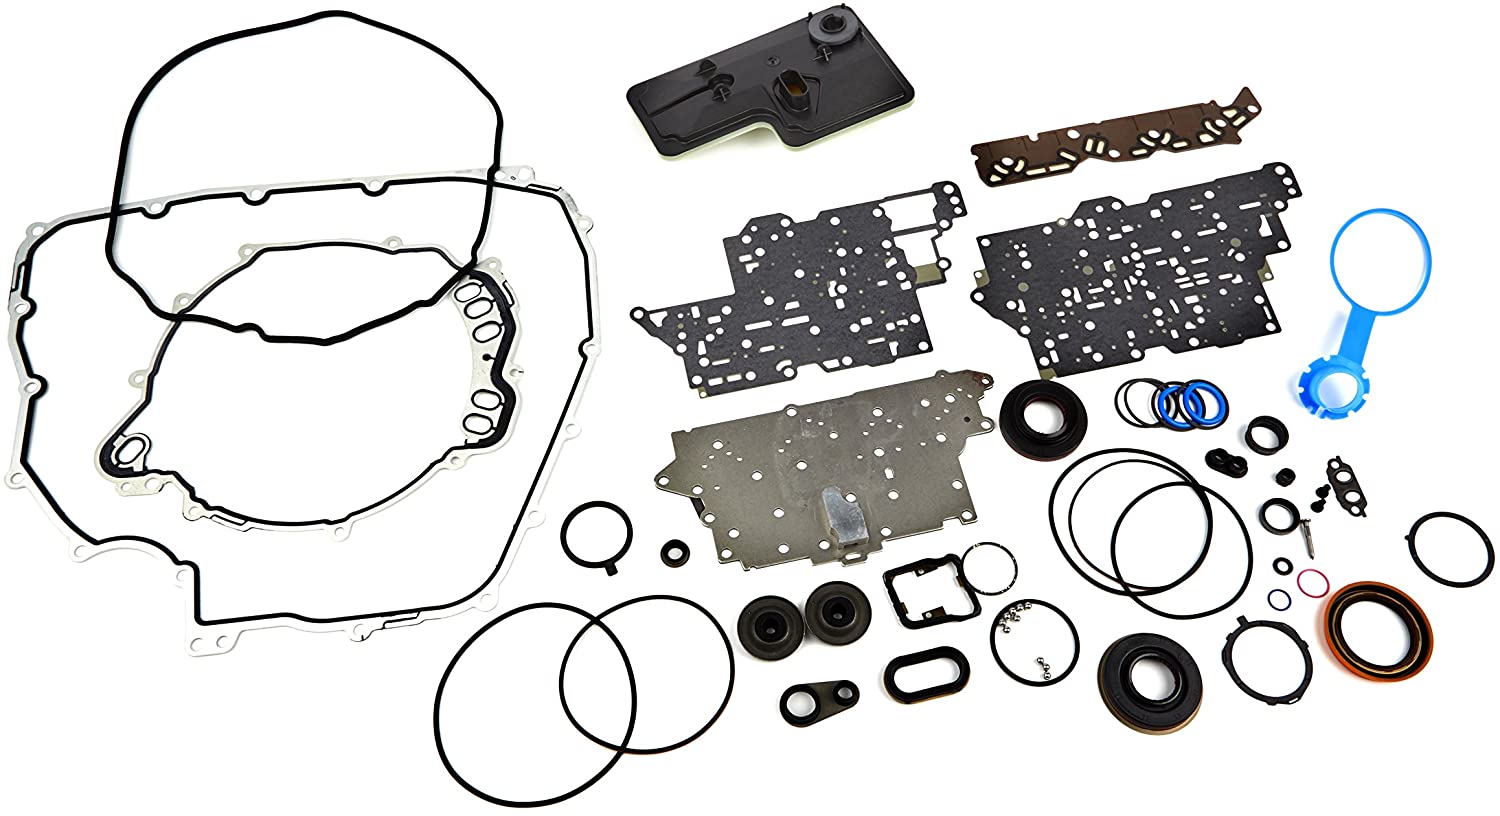 GM Genuine Parts 24276289 Automatic Transmission Service Overhaul Seal Kit